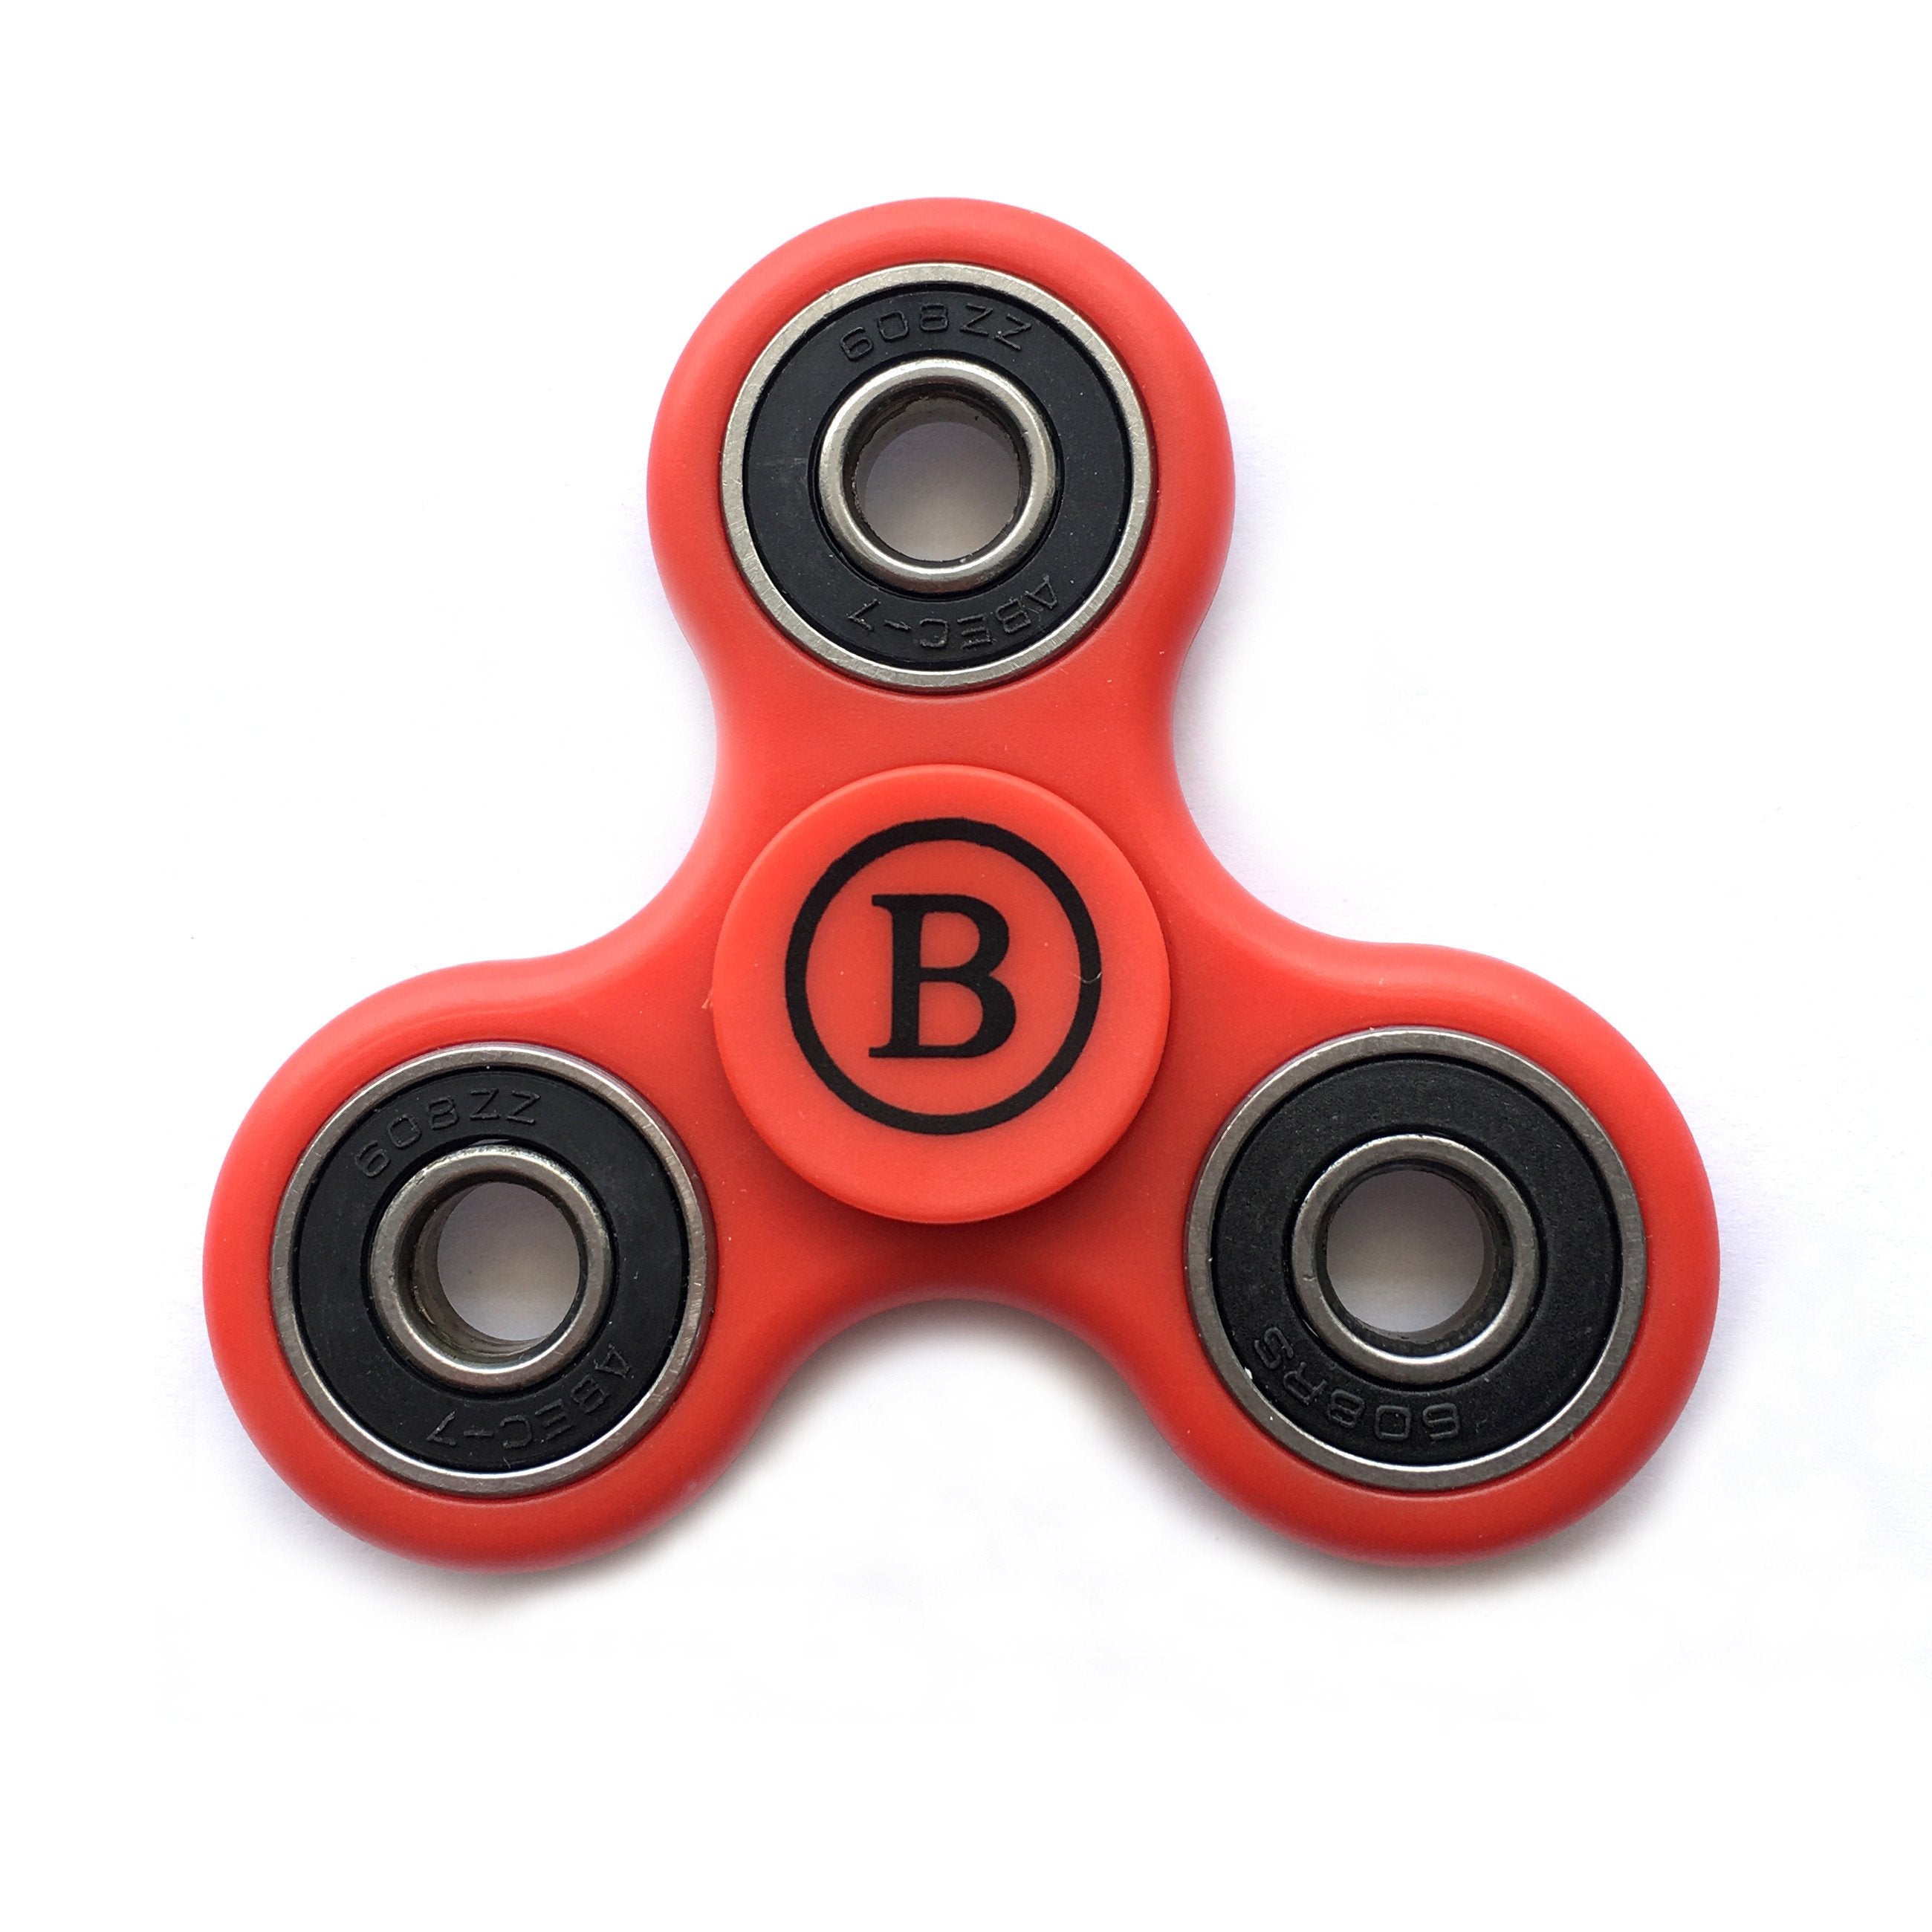 Fidget Hand Spinner High Speed Steel Bearing, Adhd Focus Anxiety Relief Toy - Red - Default